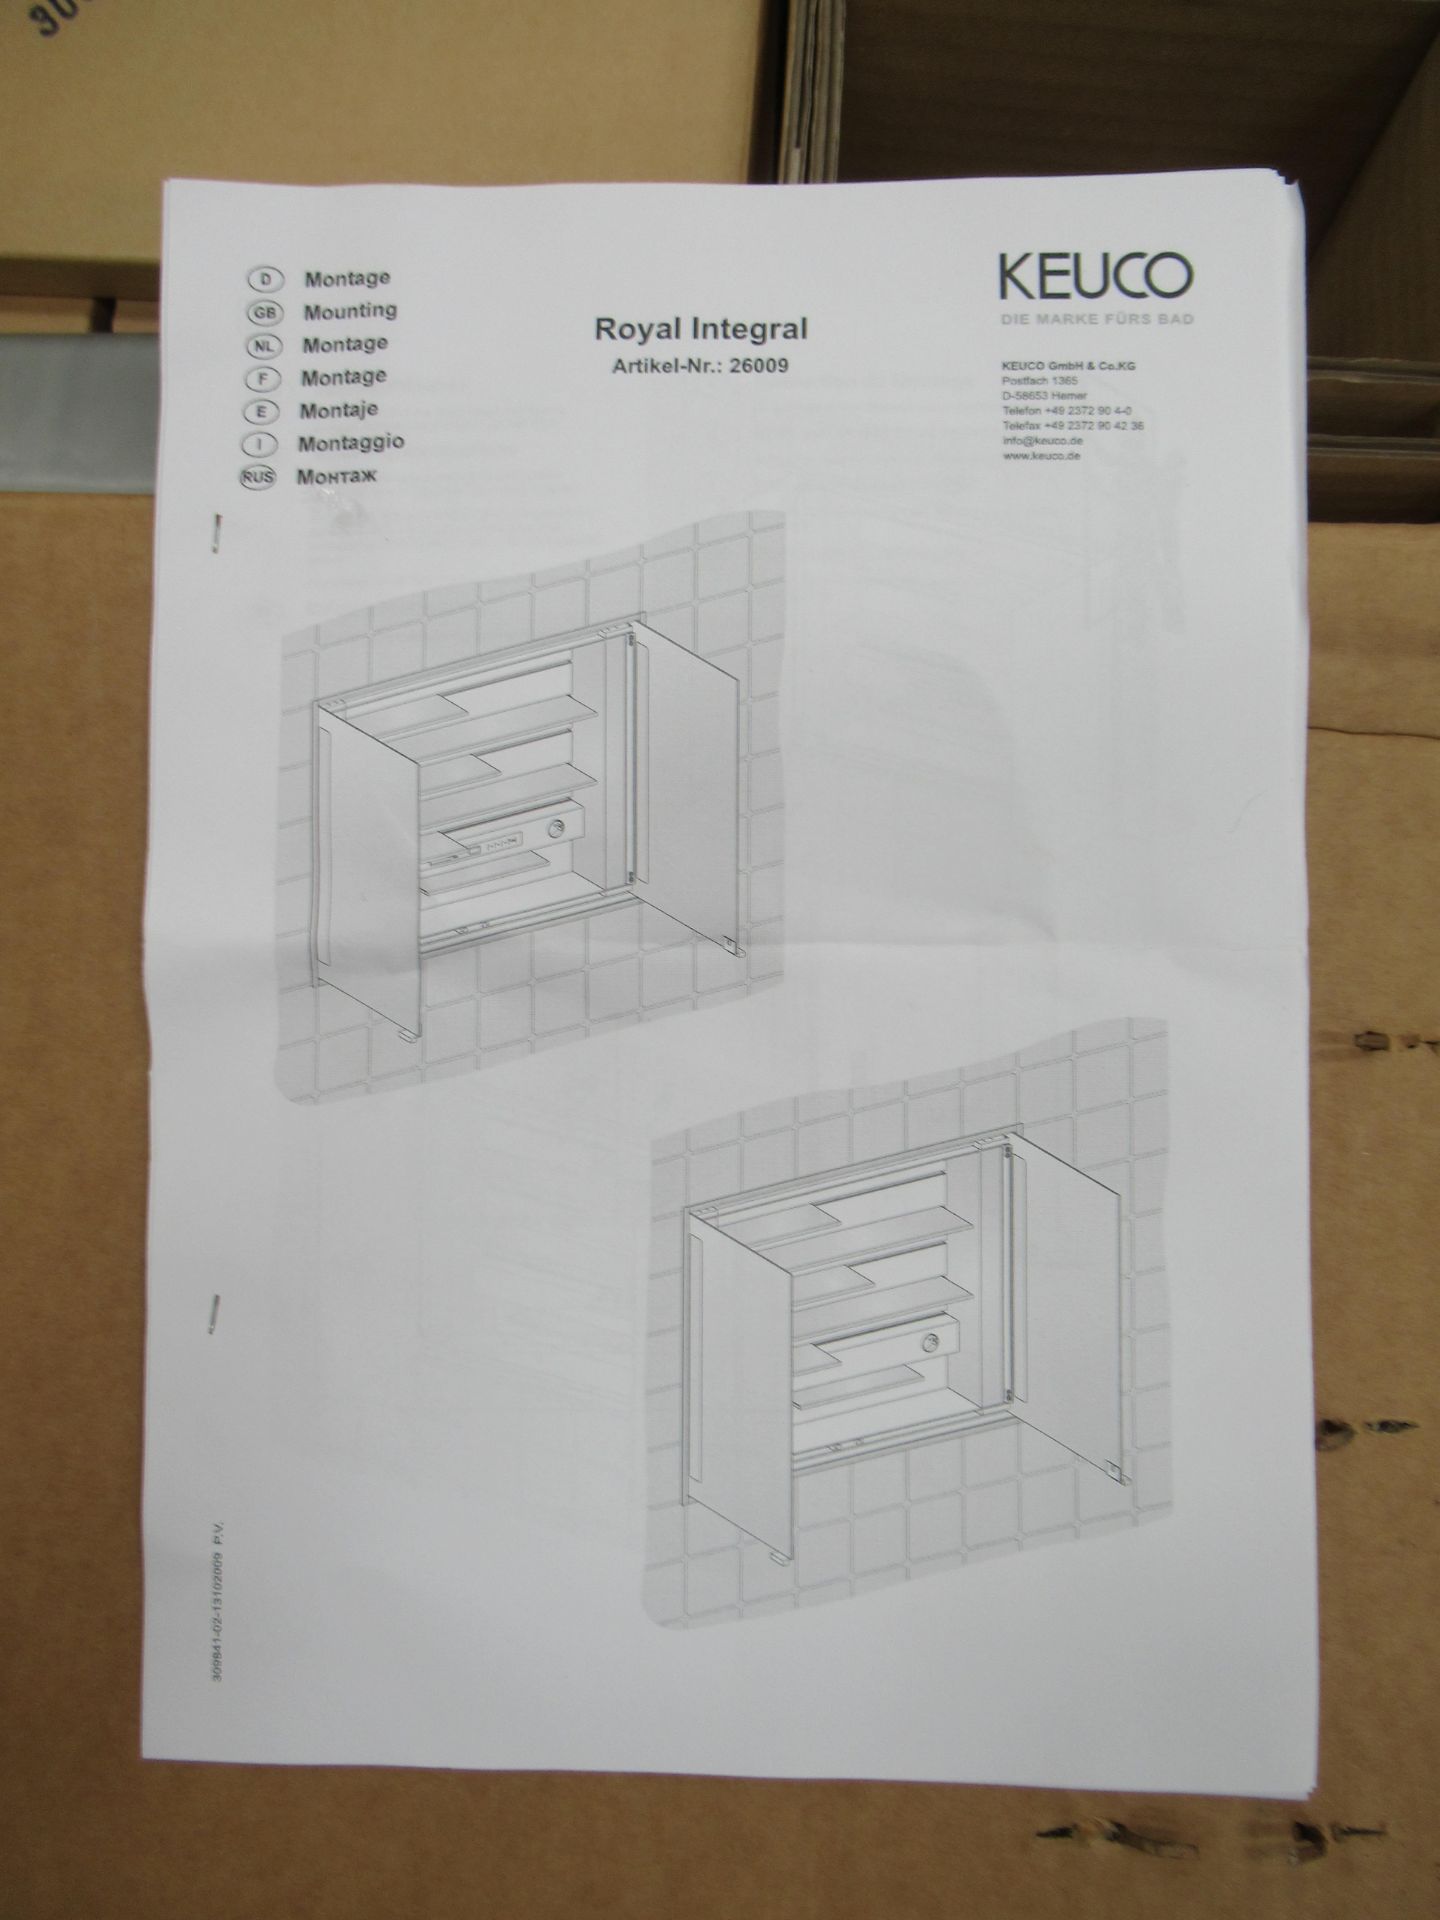 A Keuco S260 Mirror Cabinet - Image 4 of 4